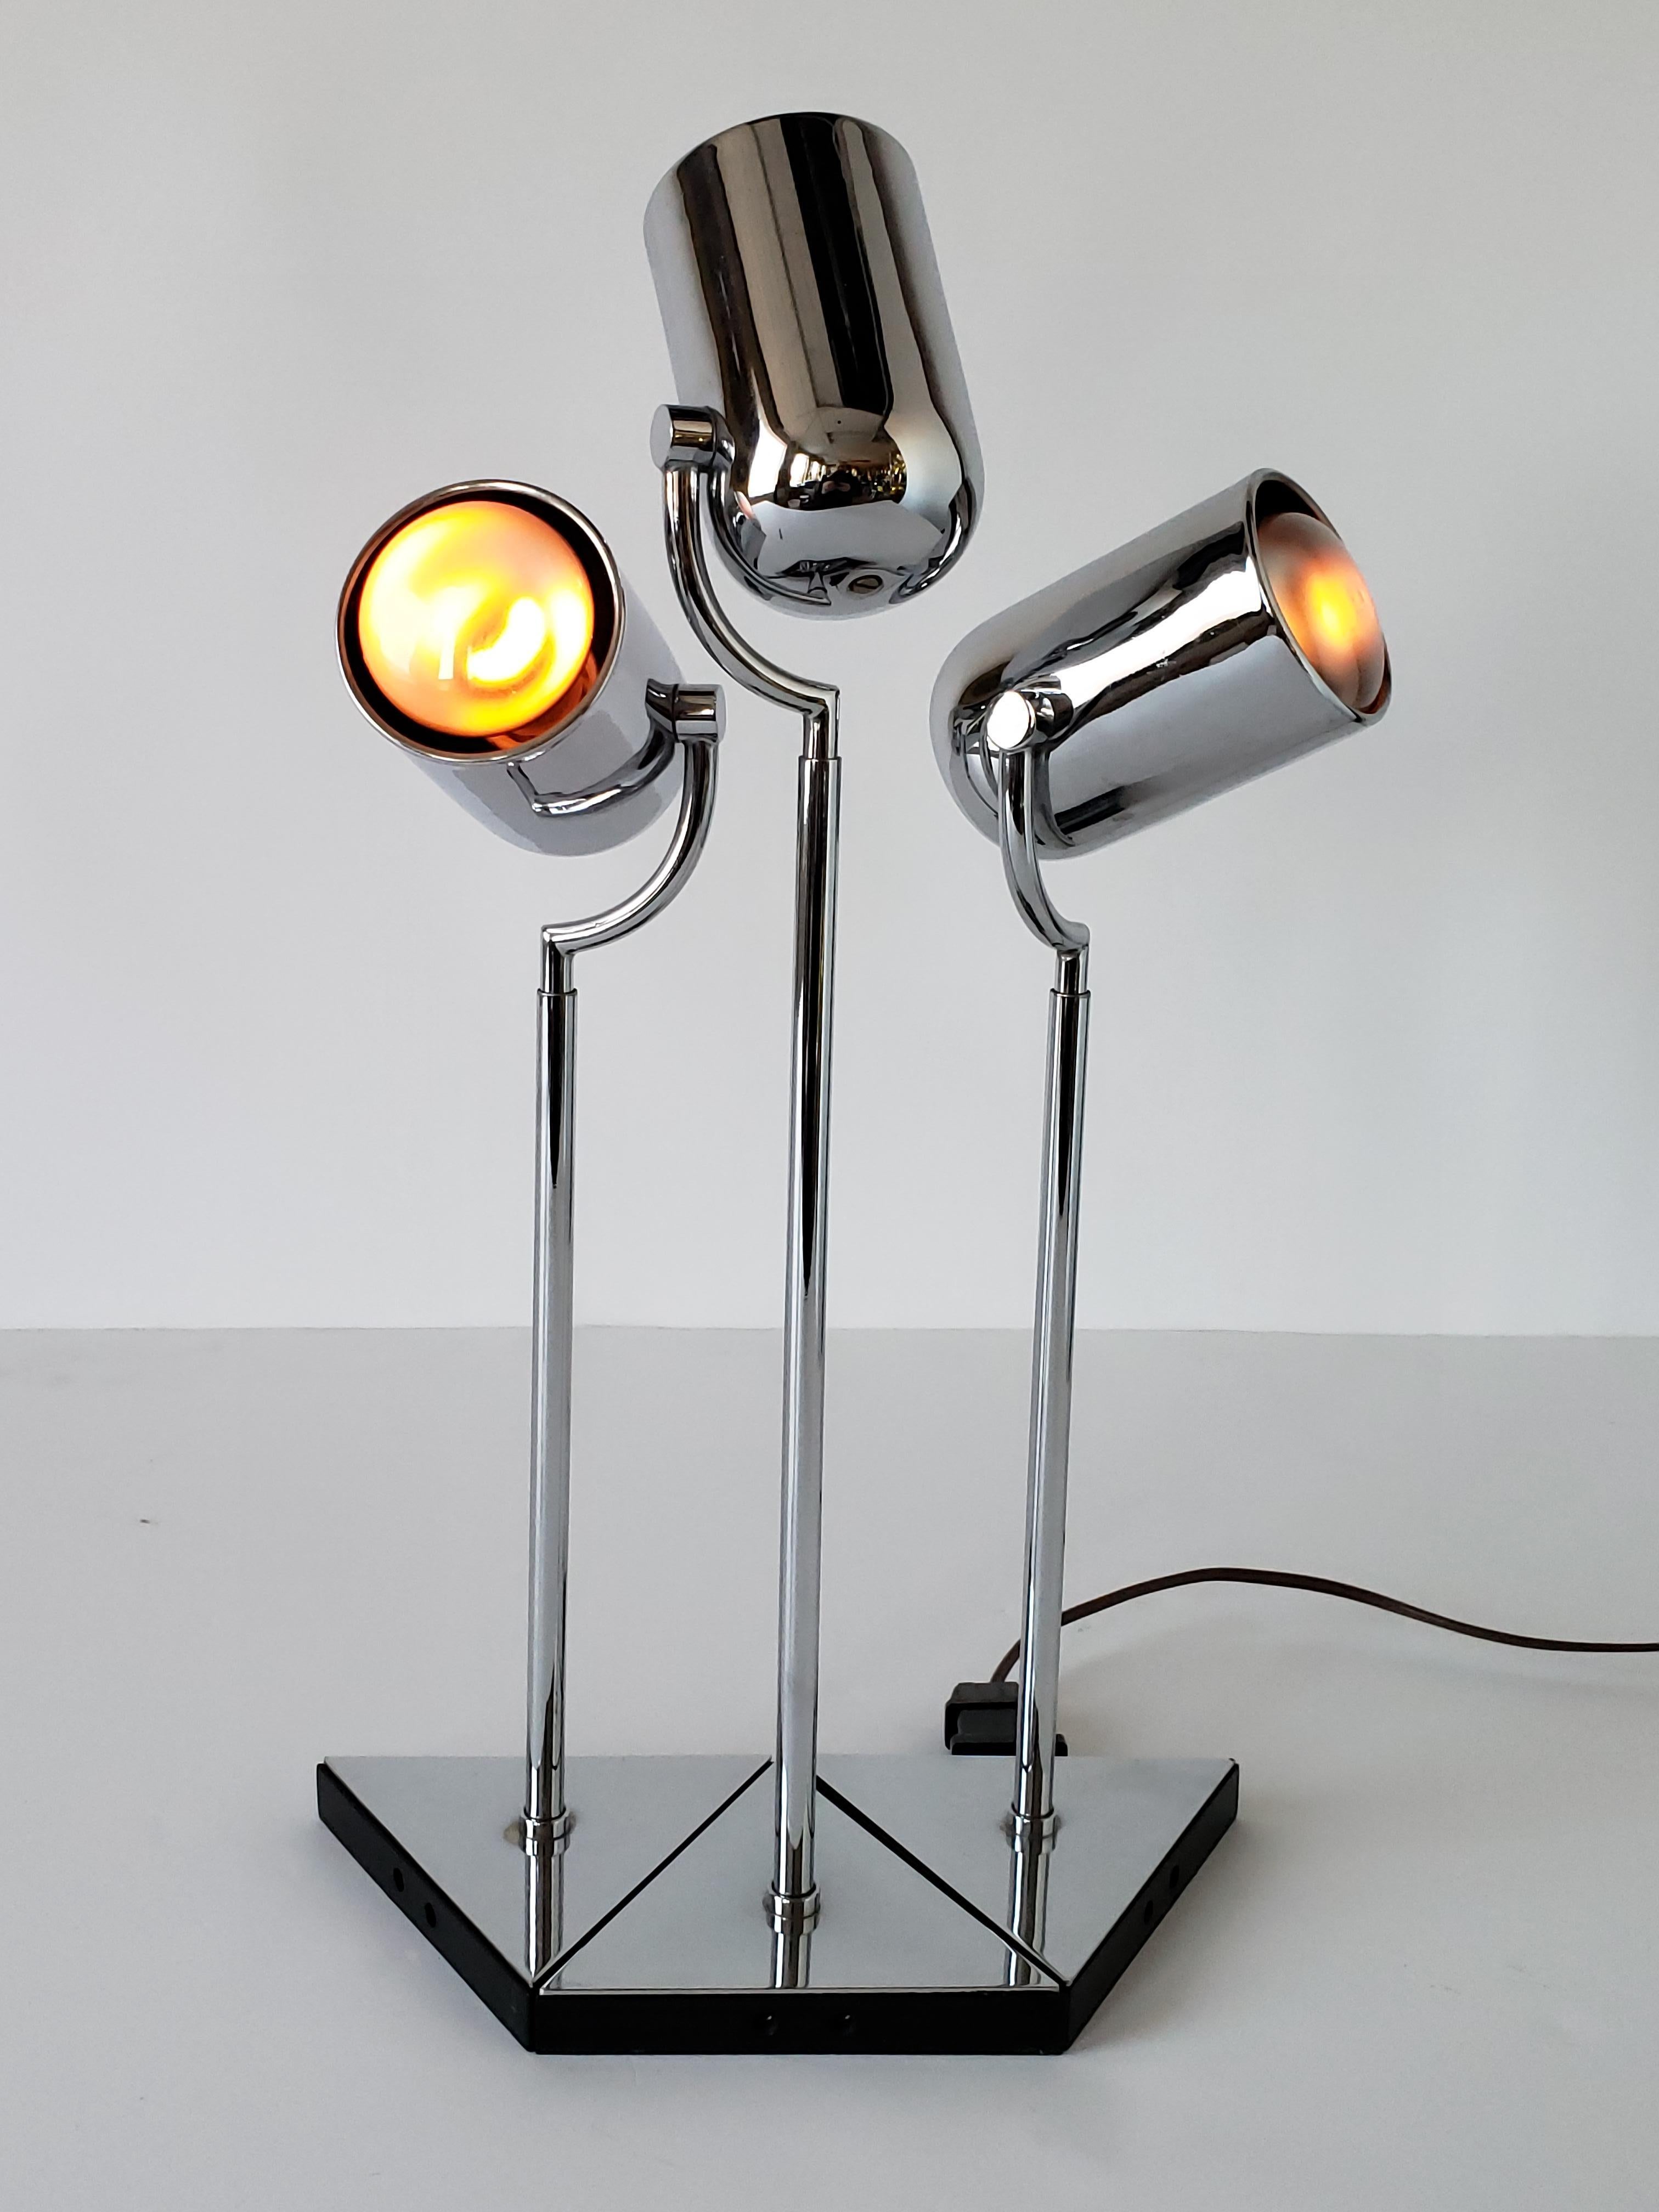 Rare Florence Casey chrome modular table lamp. 

Triangle base are interconnectable.

Chrome heads pivot left to right, up and down.

Socket are European E14 base. Come with reducer from E14 to North American E12. 

Signed item.